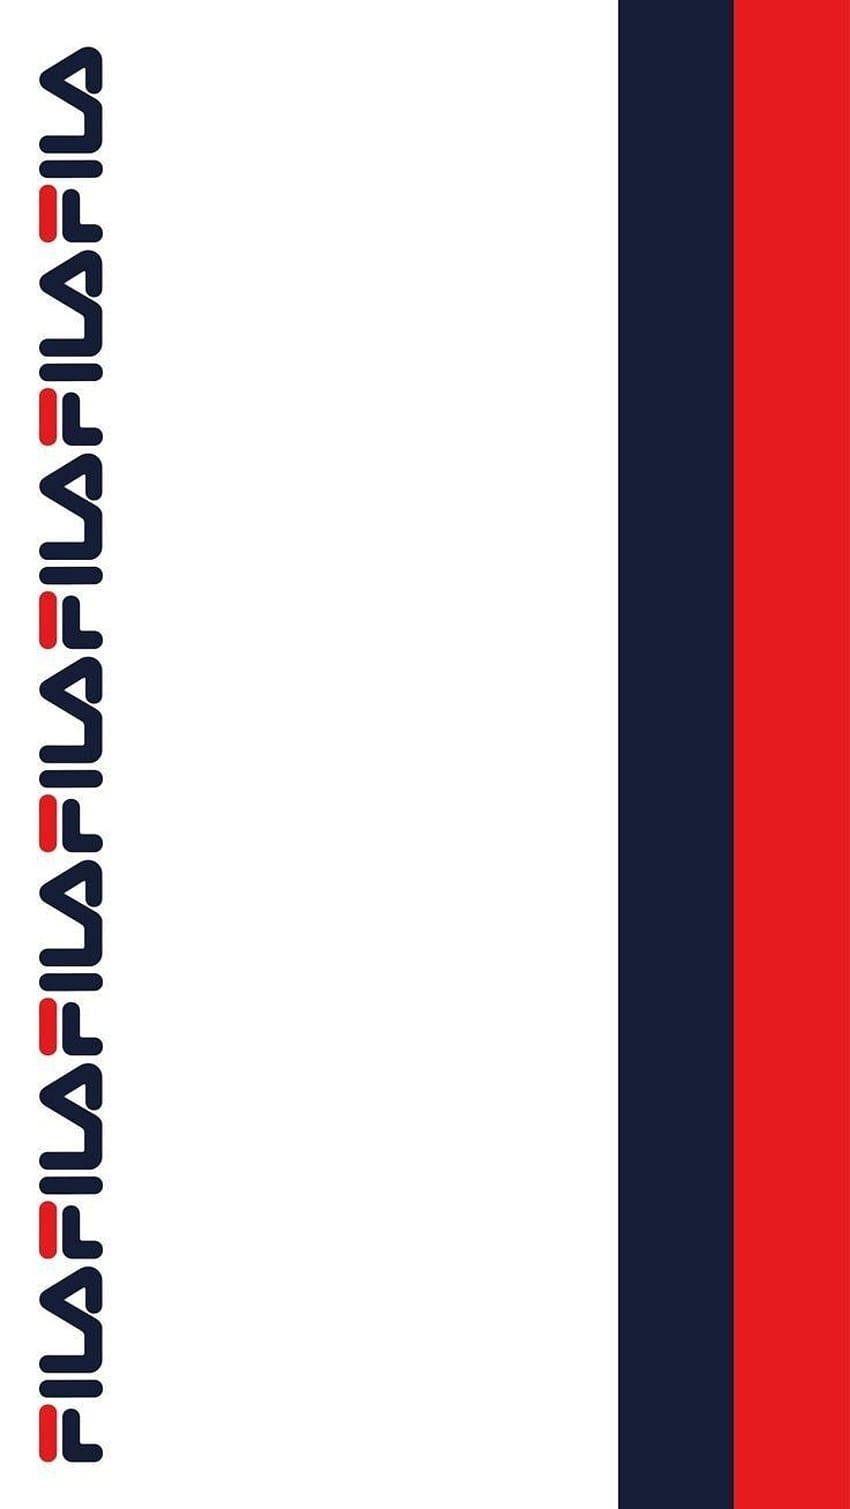 Fila White Blue And Red Wallpaper